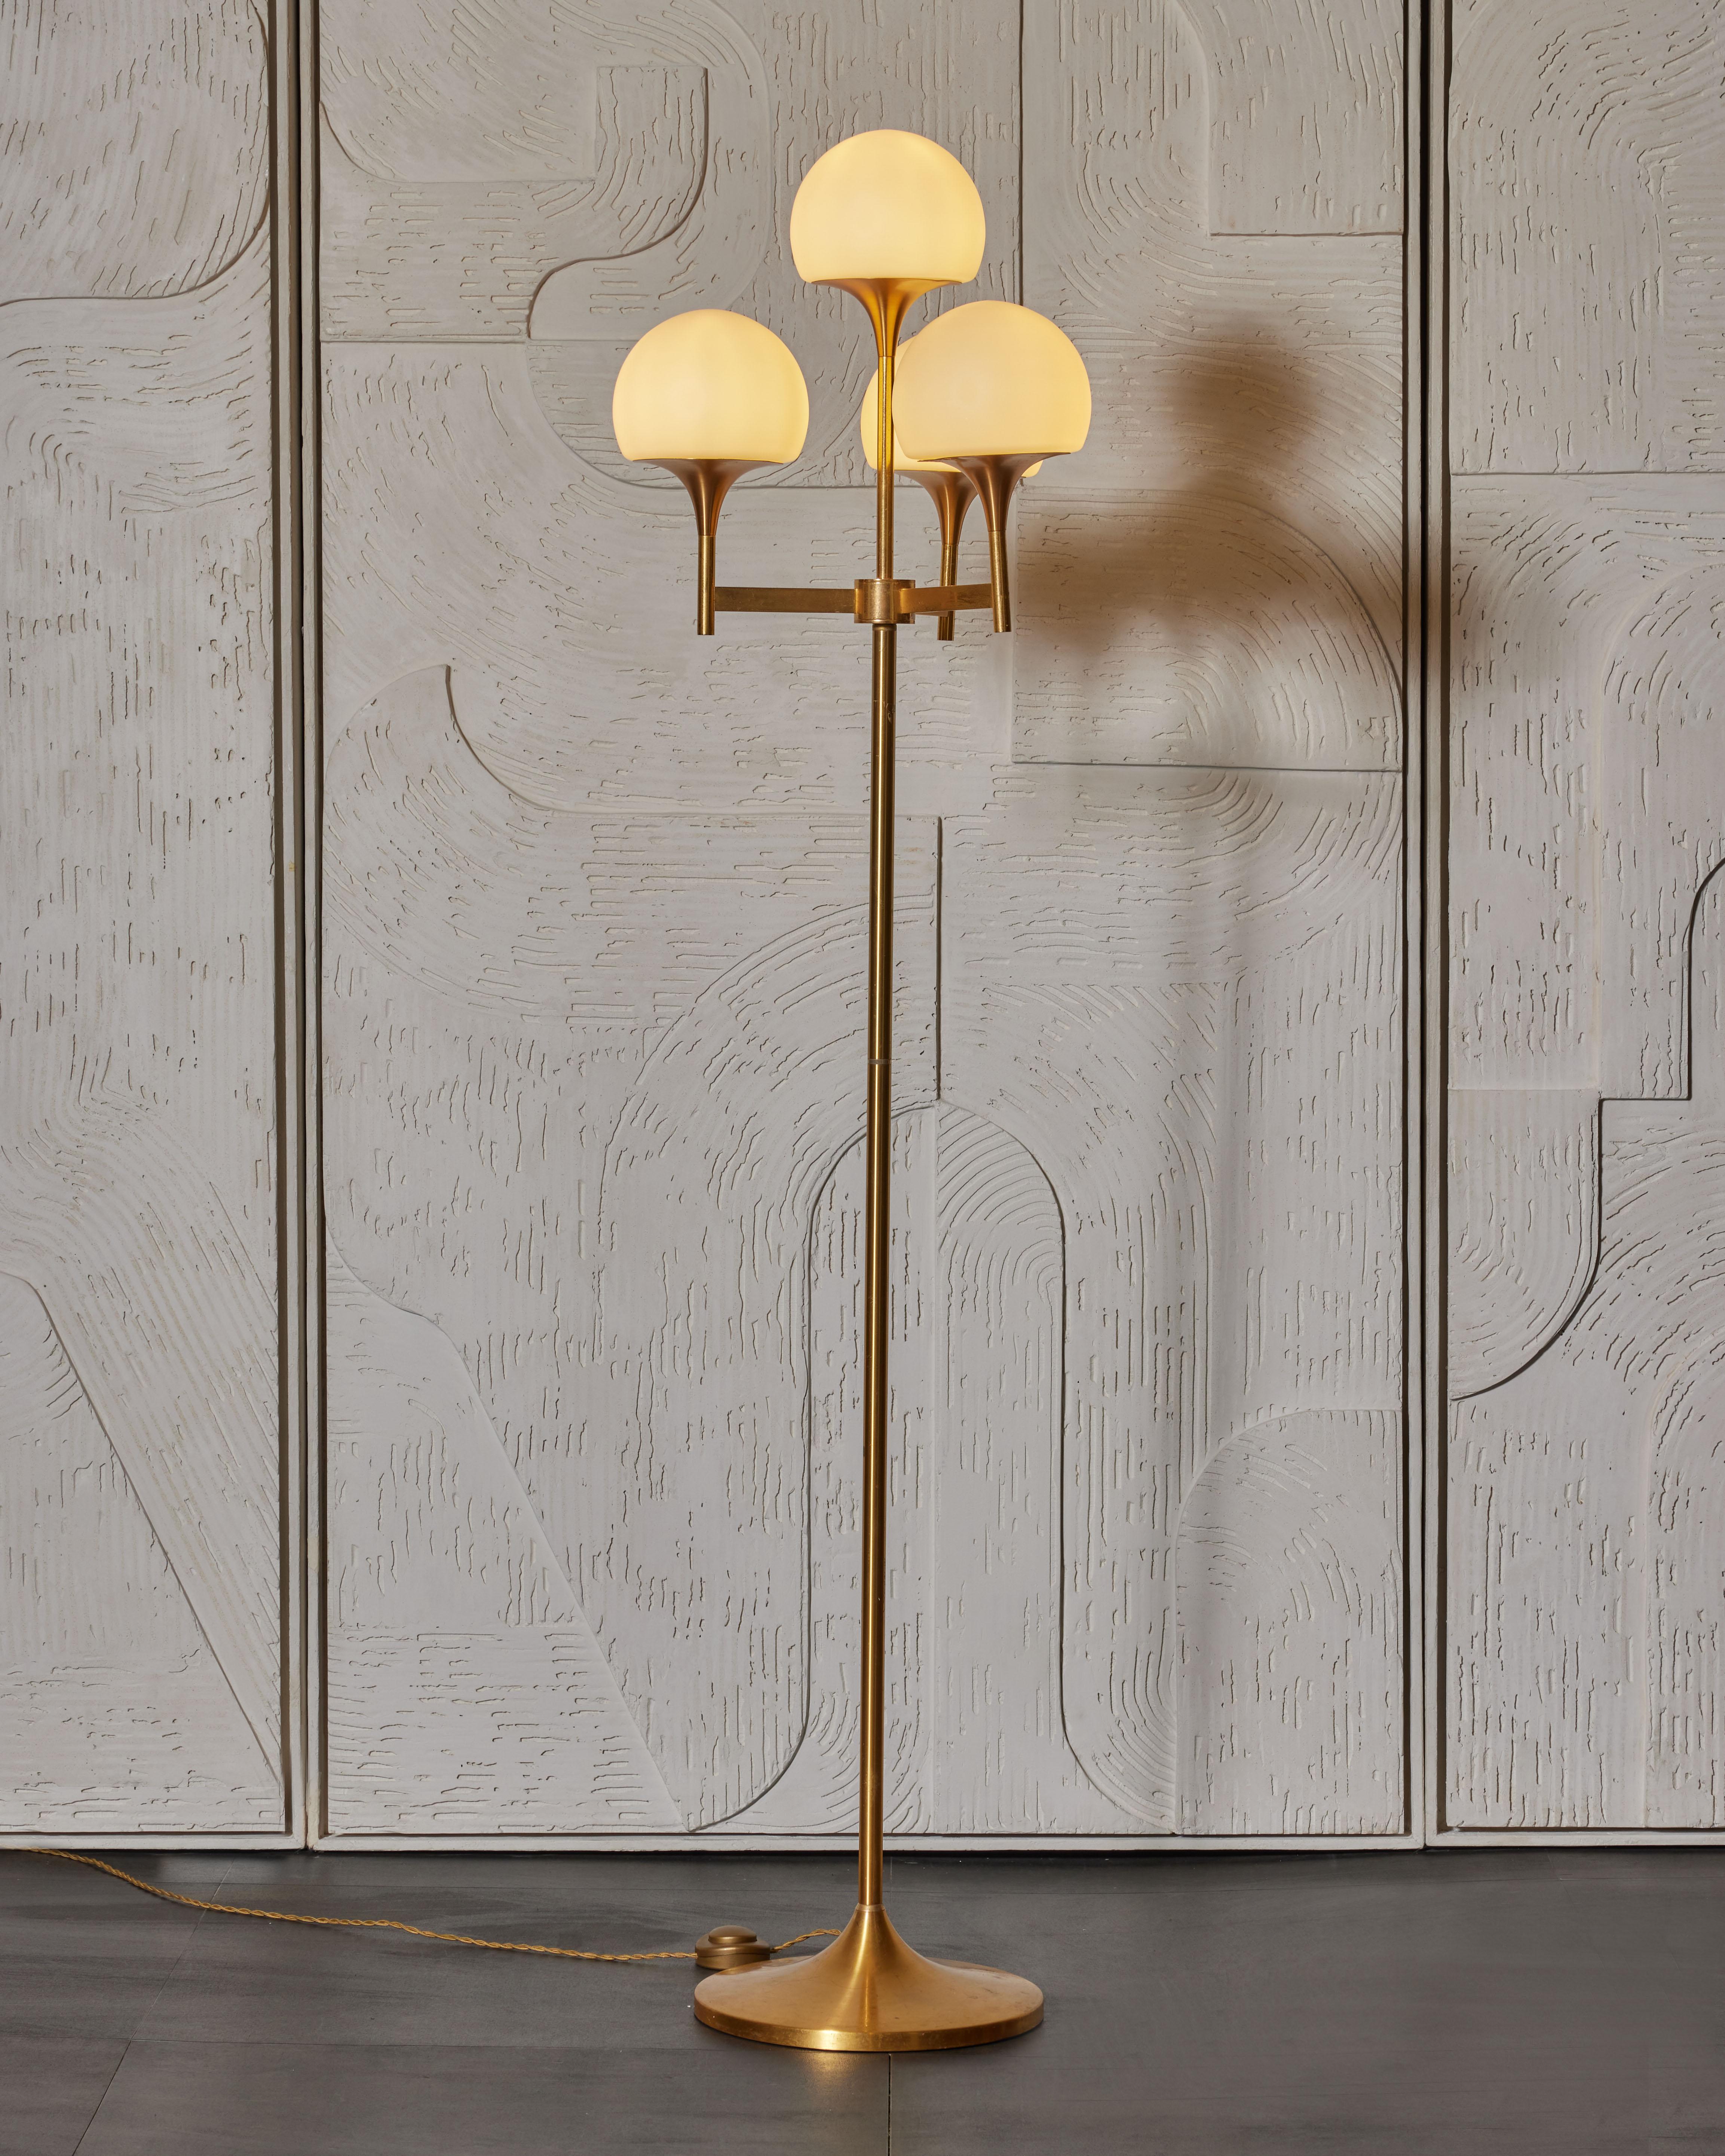 Vintage floor lamp in brass with 4 globes in opaline glass.
Italy, 1970s.